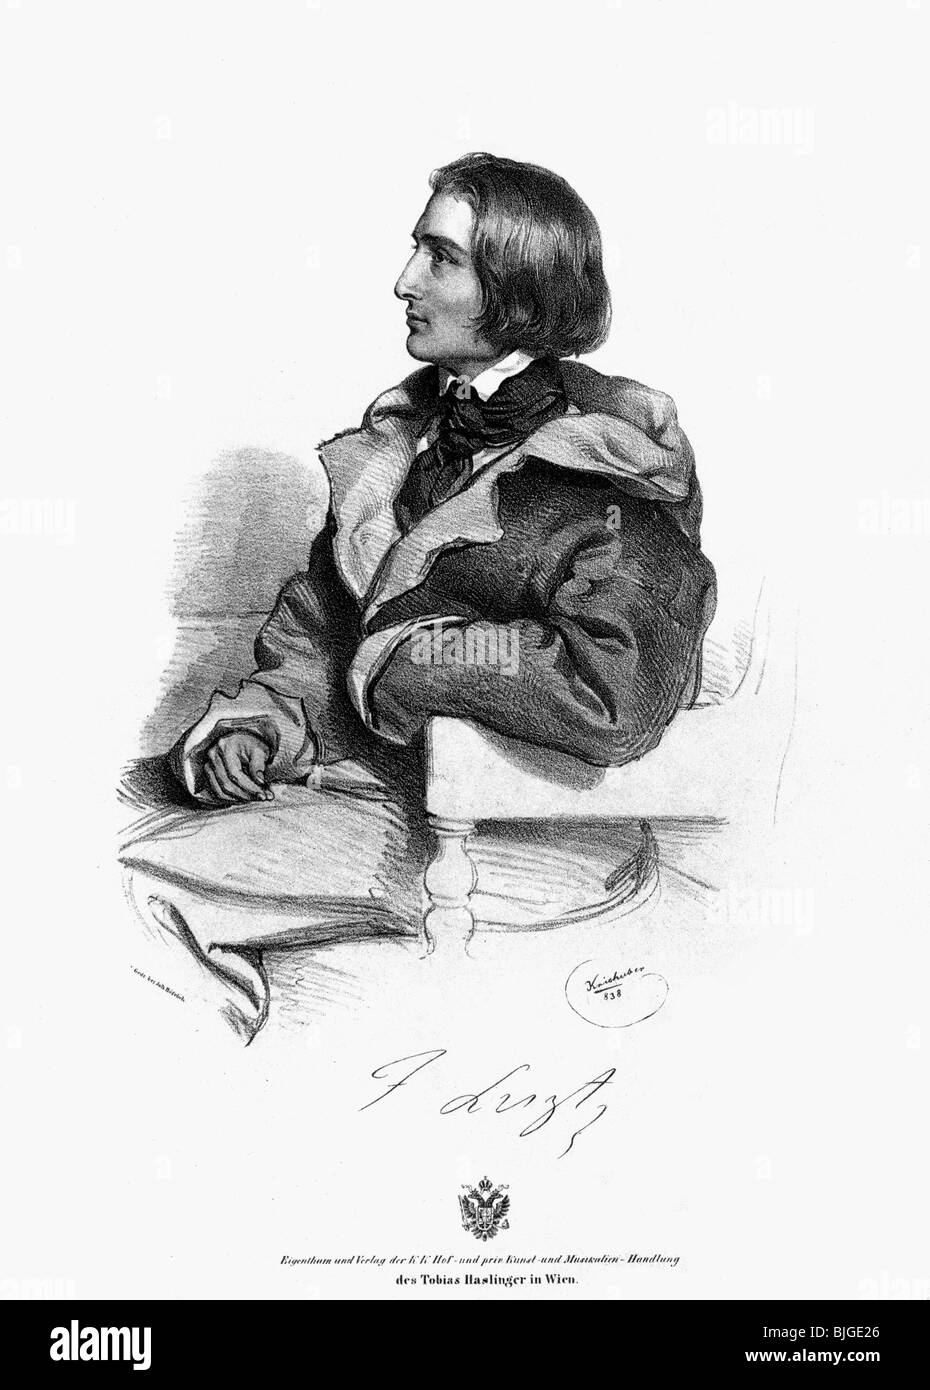 Liszt, Franz, 22.10.1811 - 31.7.1886, Hungarian composer and pianist, half length, lithograph by Joseph Kriehuber, Vienna, 1838, , Stock Photo